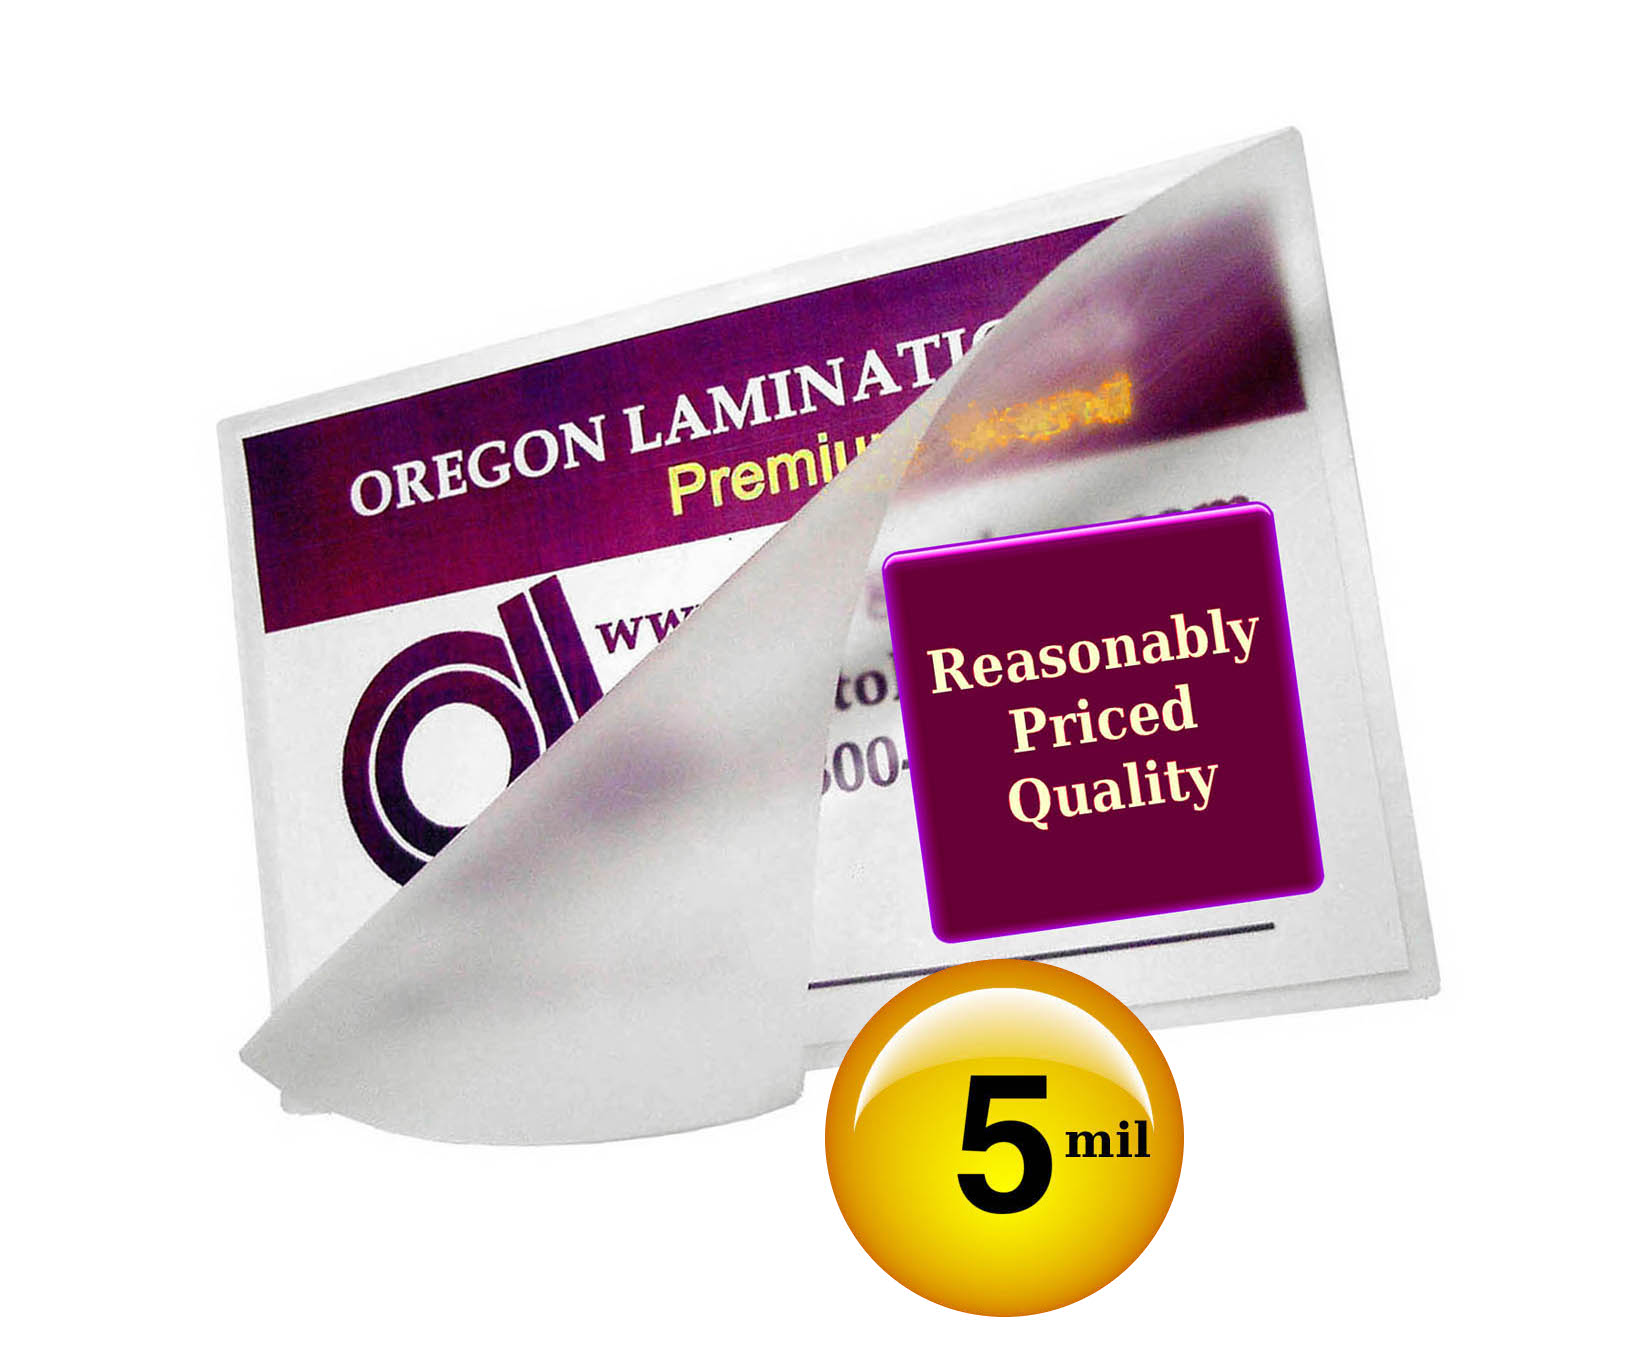 Letter Size 5mil Laminating Pouch Sheets Laminate Paper